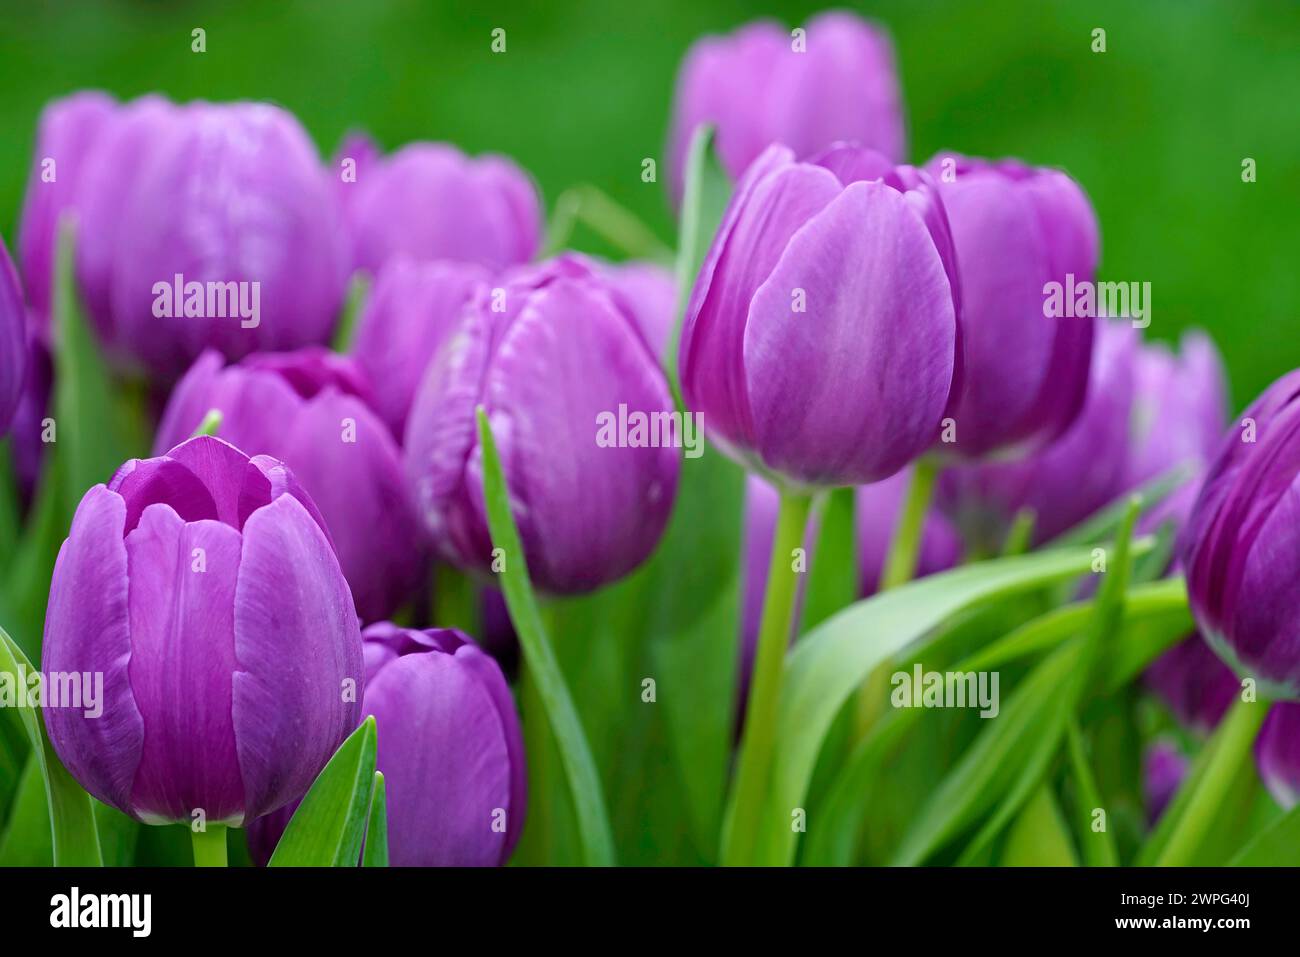 Natural colorful closeup on a group of purple Tulips, Tulipa flowers against a green background Stock Photo